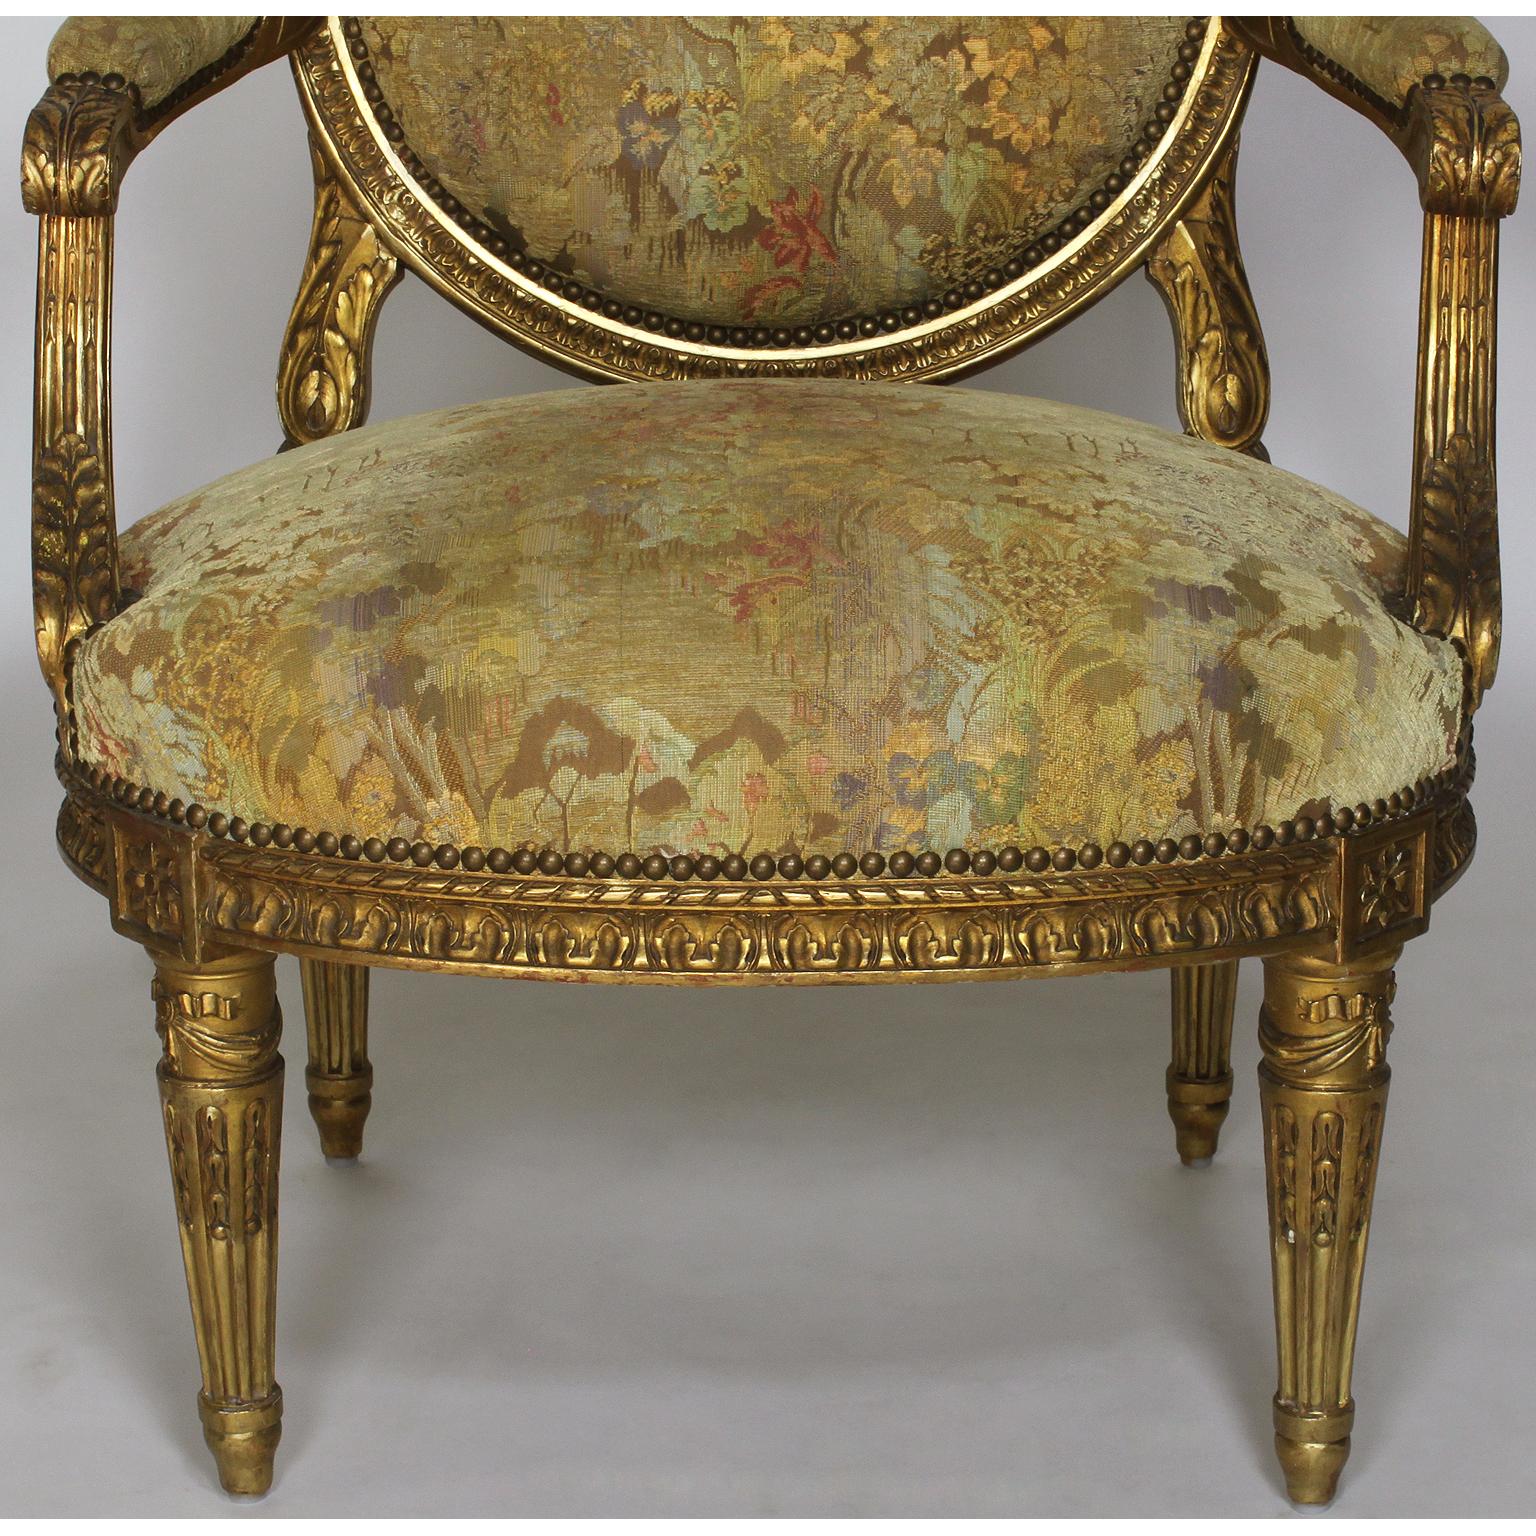 Fine French 19th Century Louis XVI Style Giltwood Carved Five-Piece Salon Suite For Sale 6